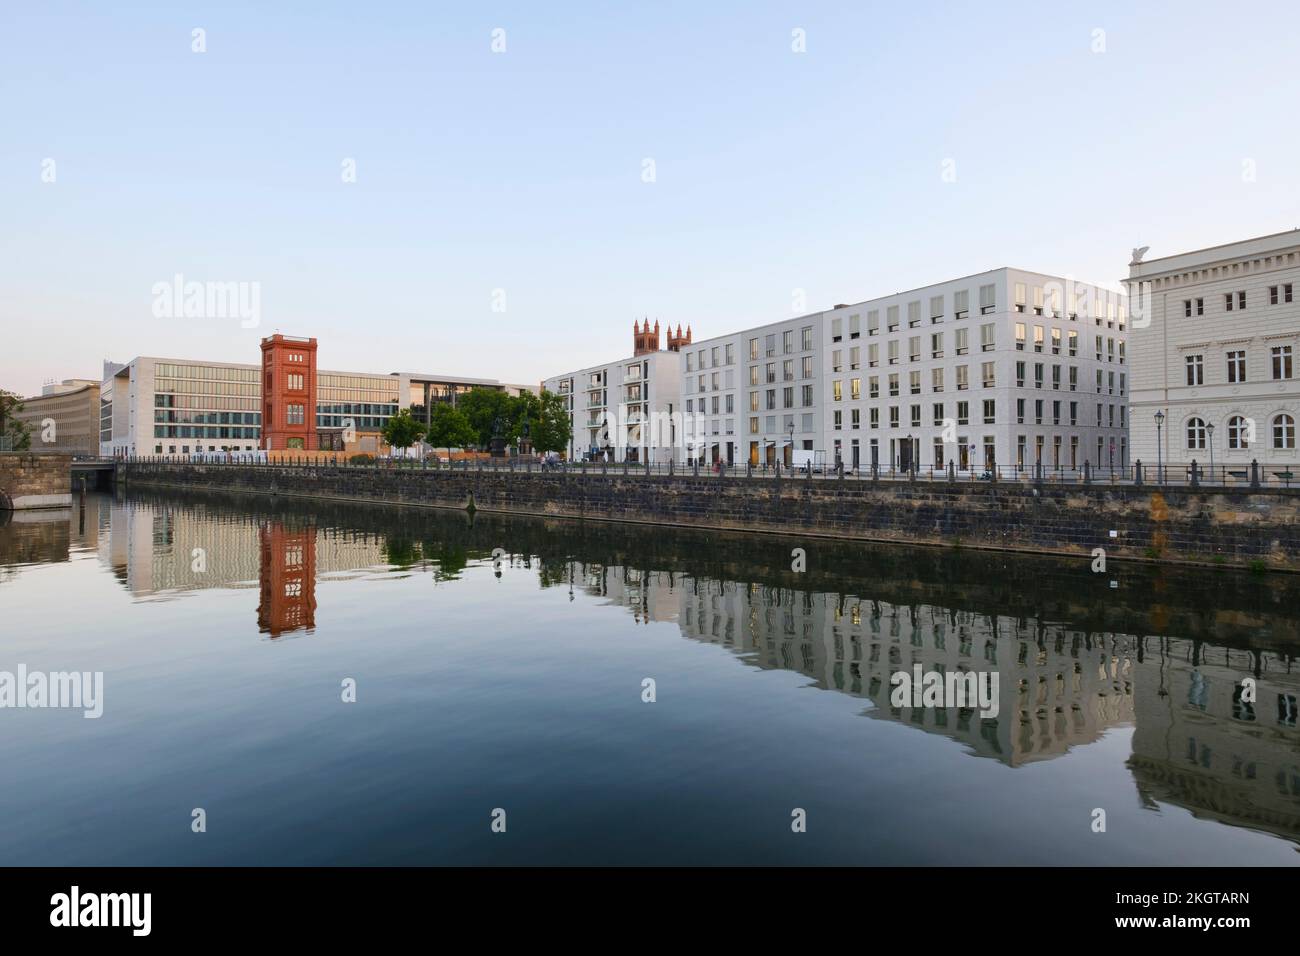 Germany, Berlin, Spree river flowing through Mitte district Stock Photo